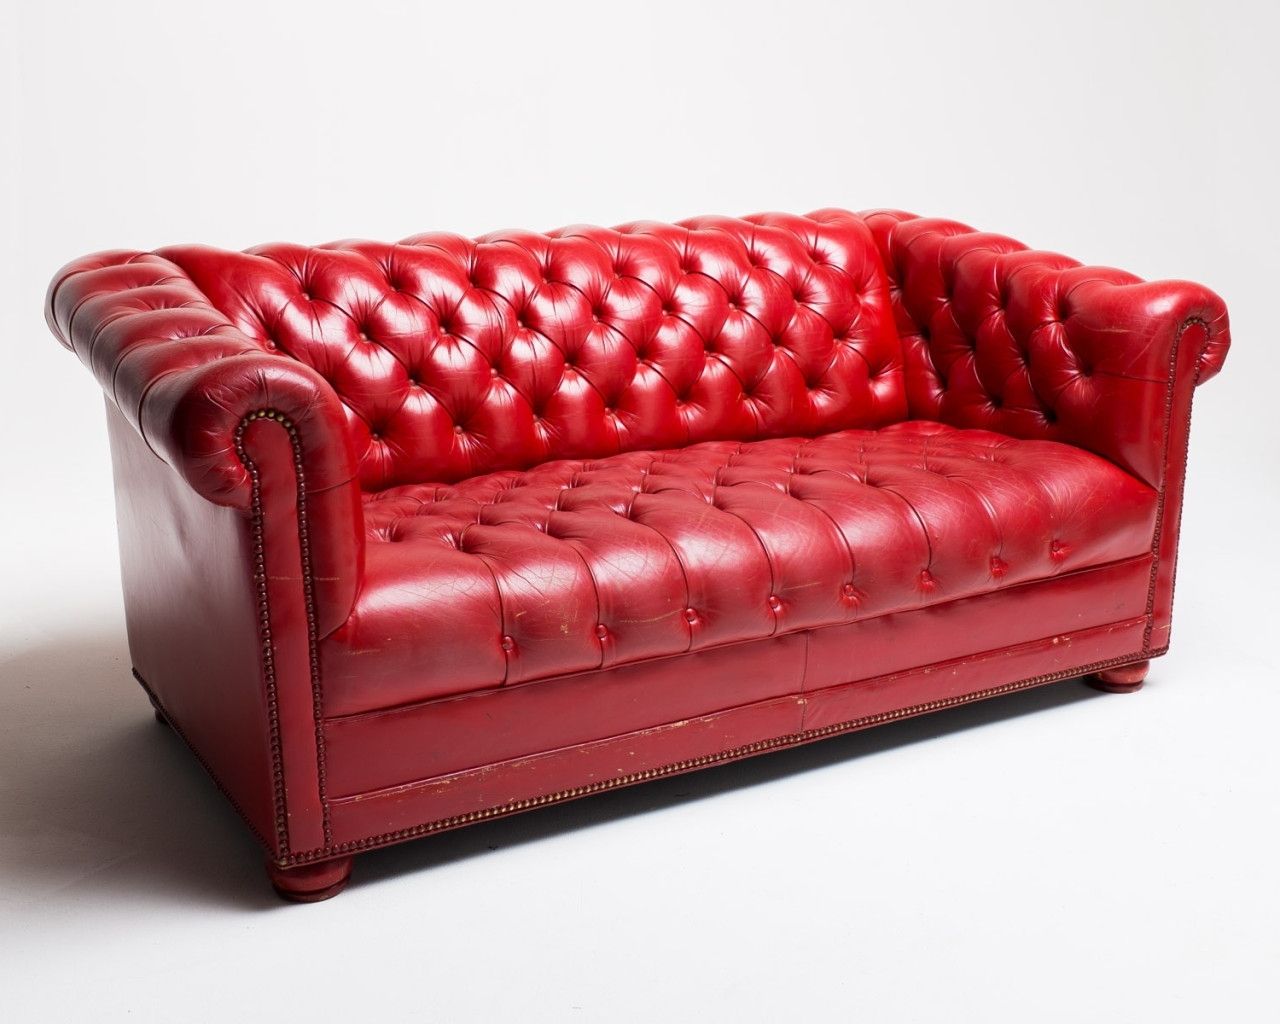 Preferred Co002 Red Leather Sofa (View 3 of 20)